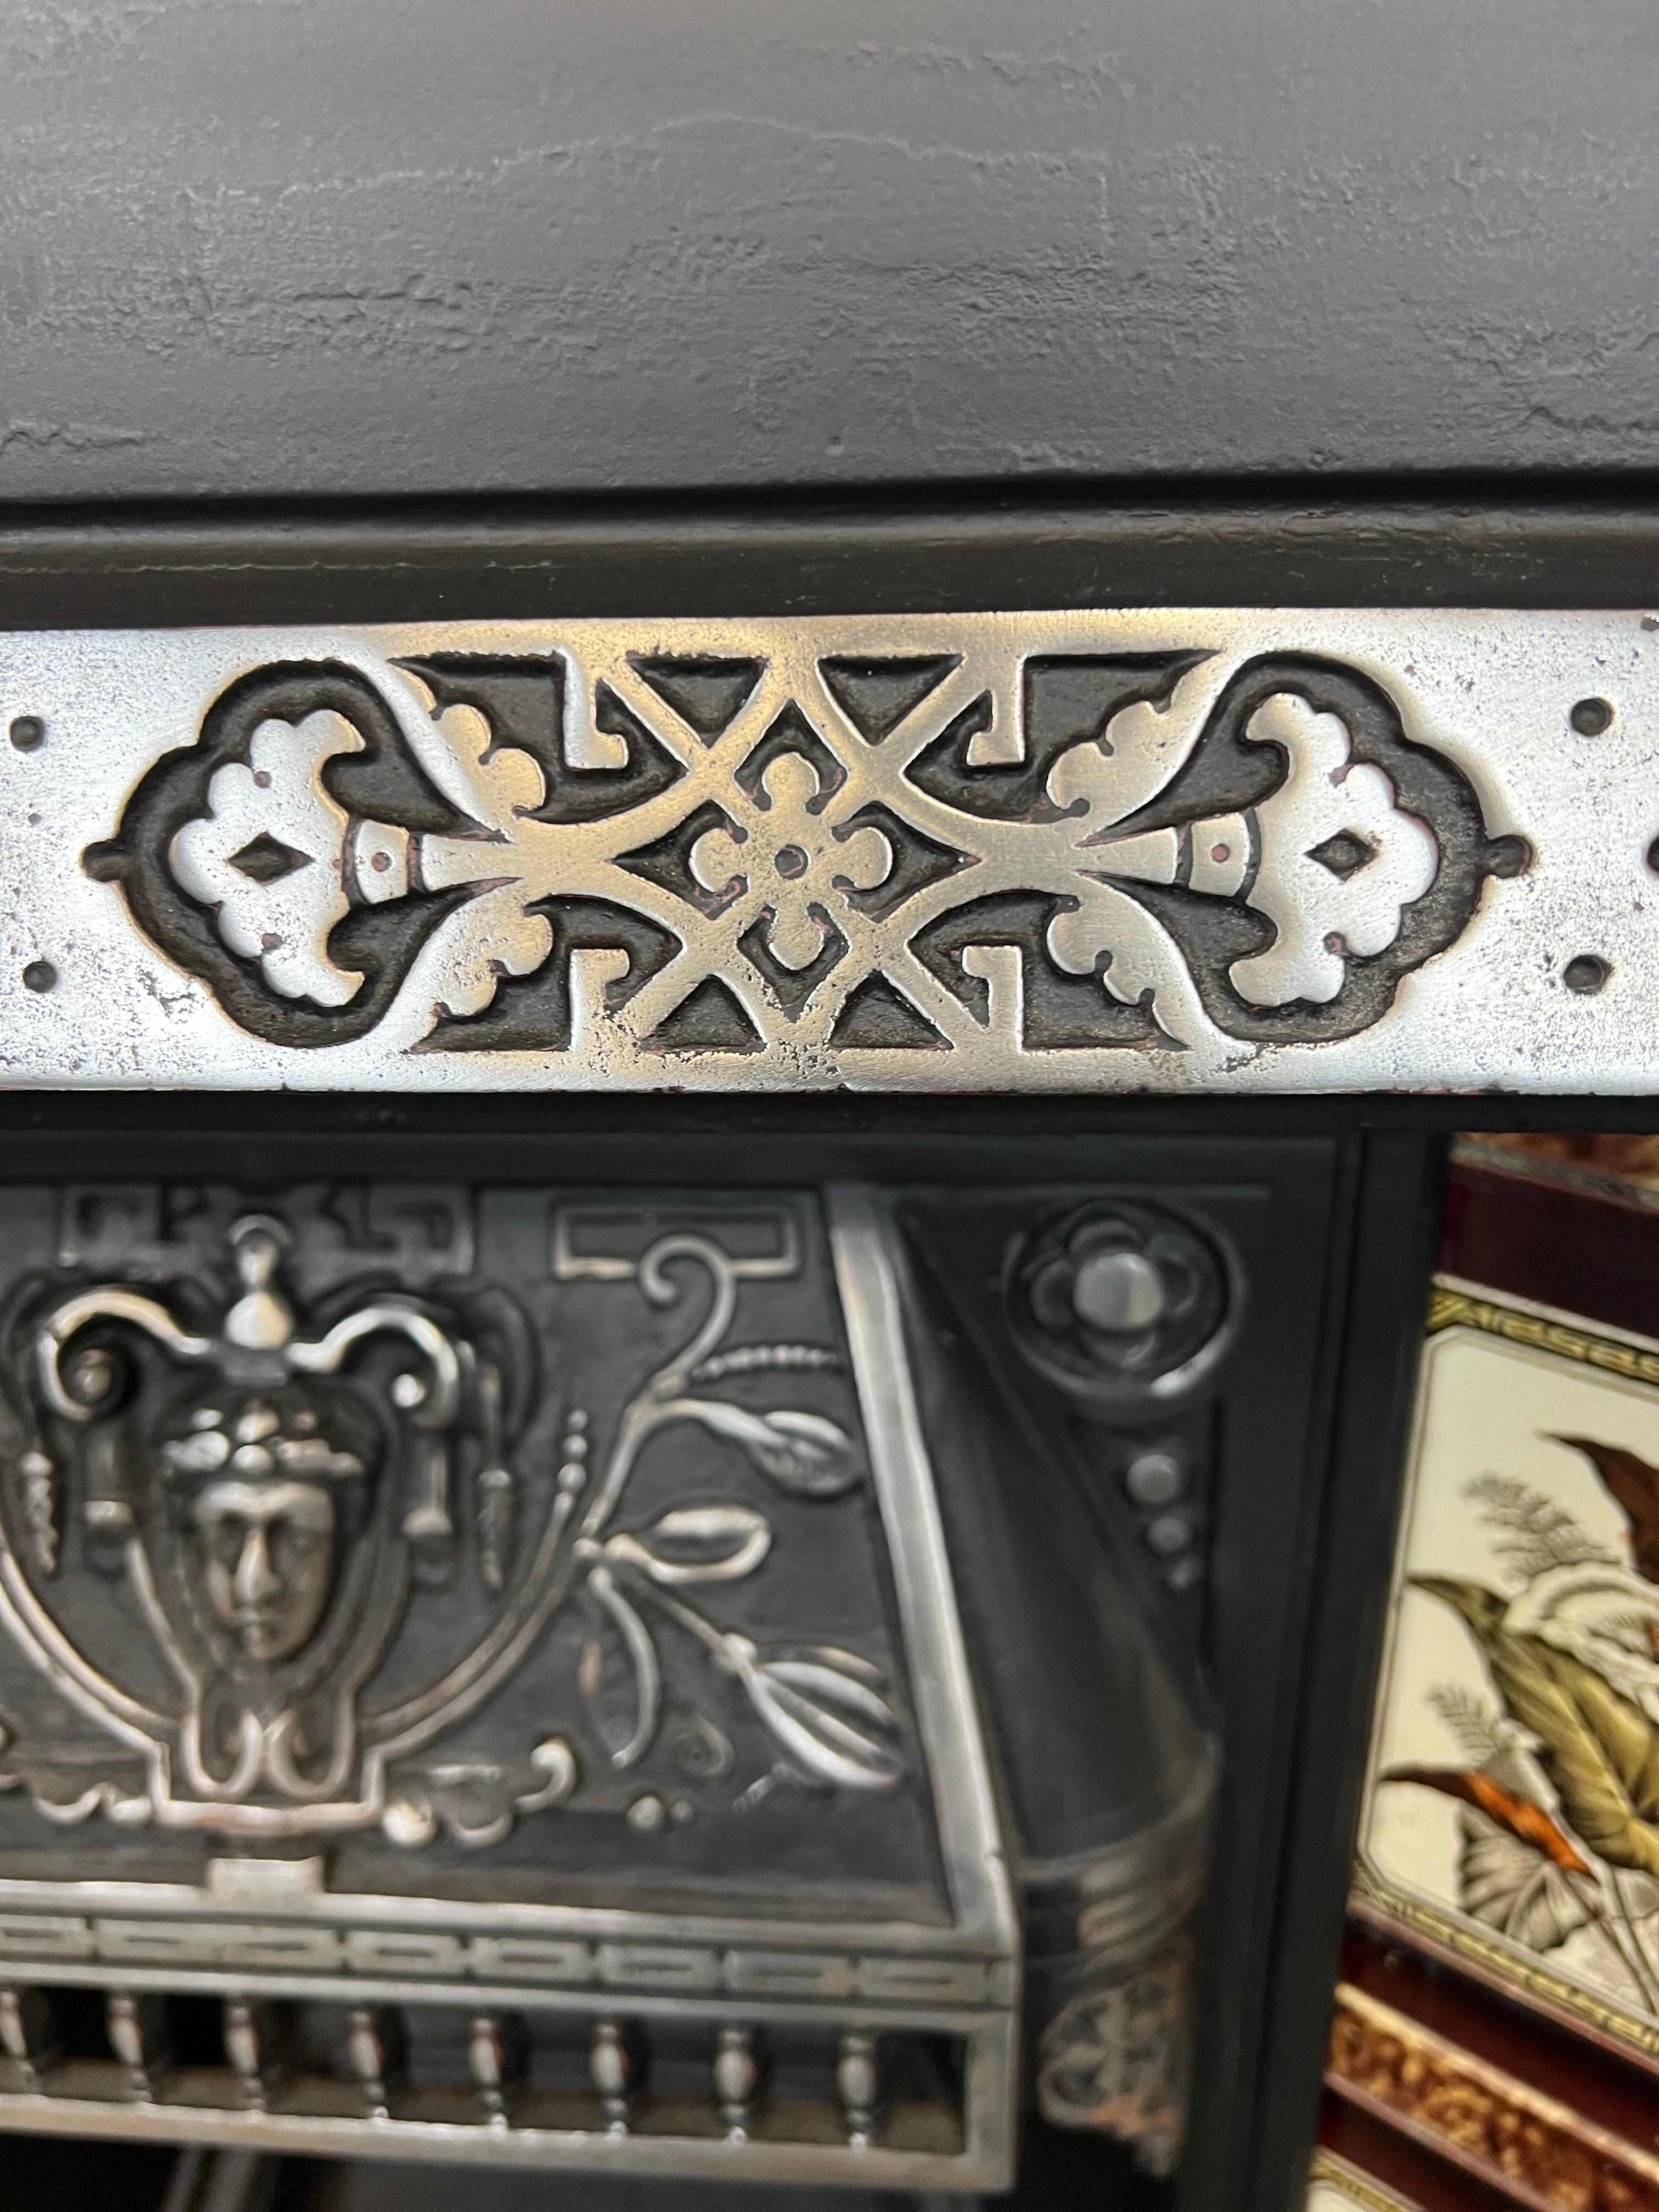 19th Century tiled cast iron fireplace insert.
A fine example of English Victoriana. Made in England circa 1880.
Burnished relief to the decorative hood showing boy face & foliage, bars and patterned trim with blackened finish to fire back and